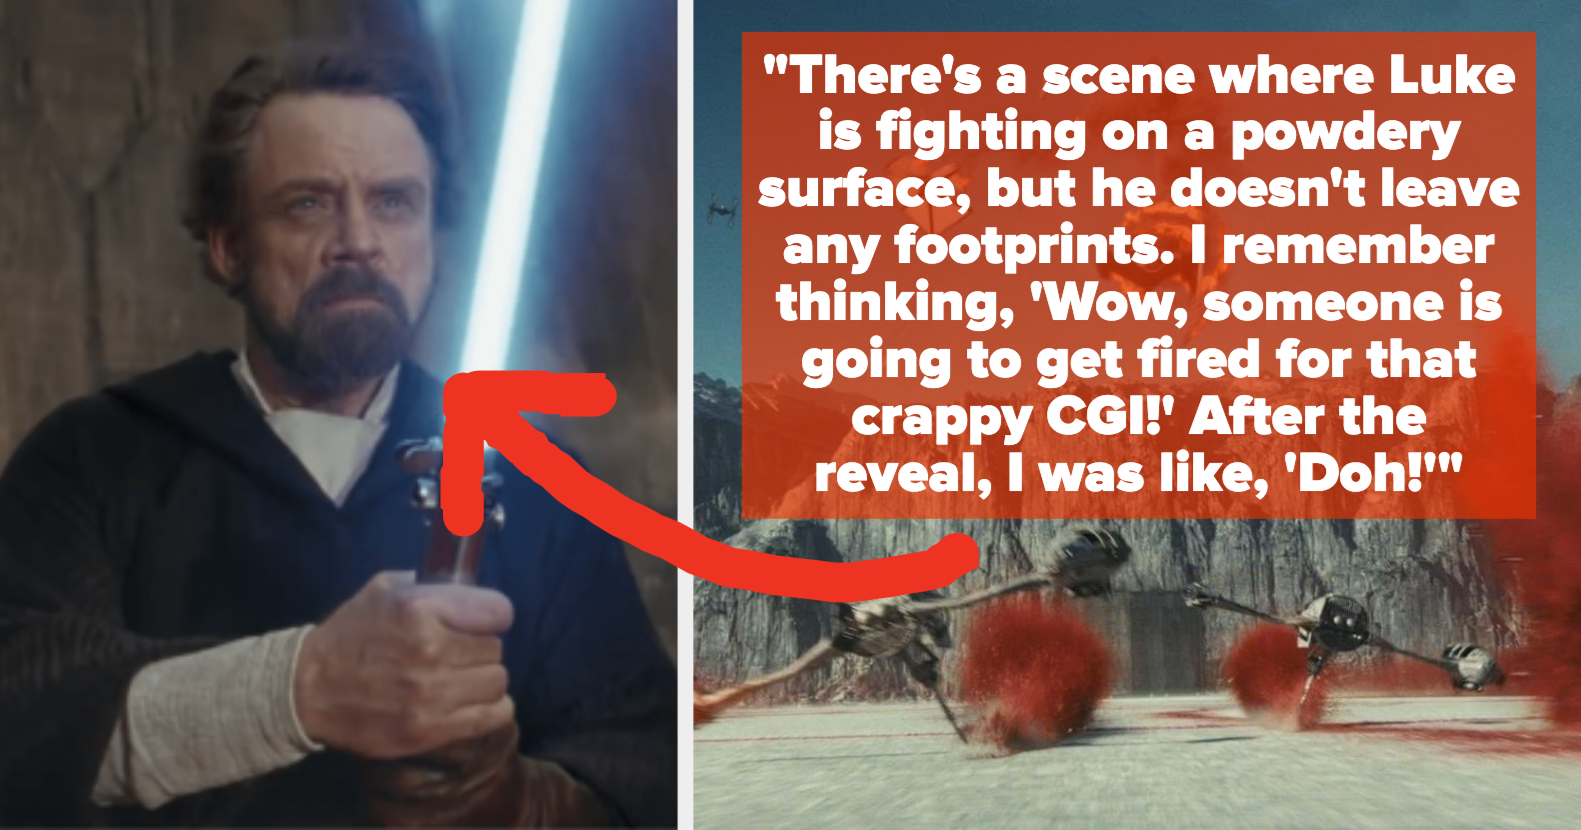 Foreshadowing In Movies People Thought Were Errors: Reddit